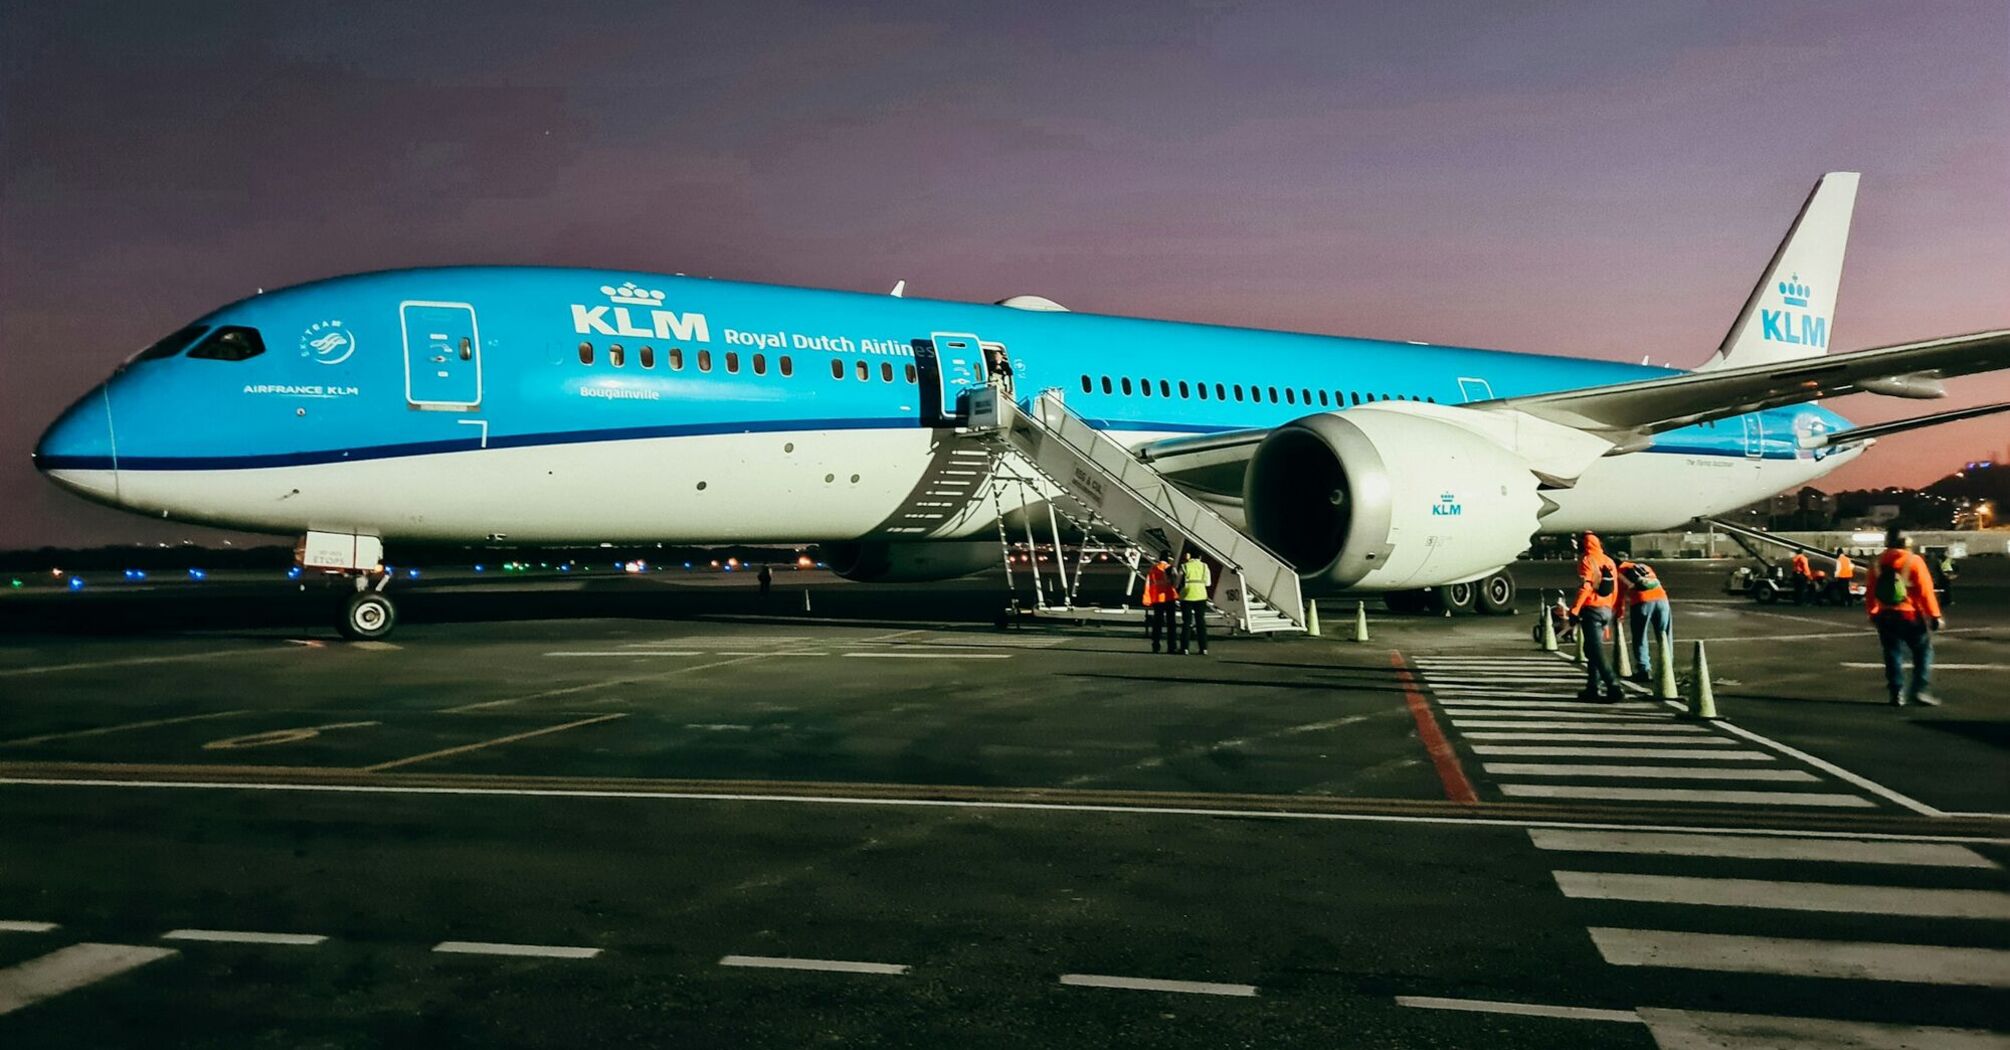 KLM Royal Dutch Airlines Boeing aircraft parked on the tarmac during twilight